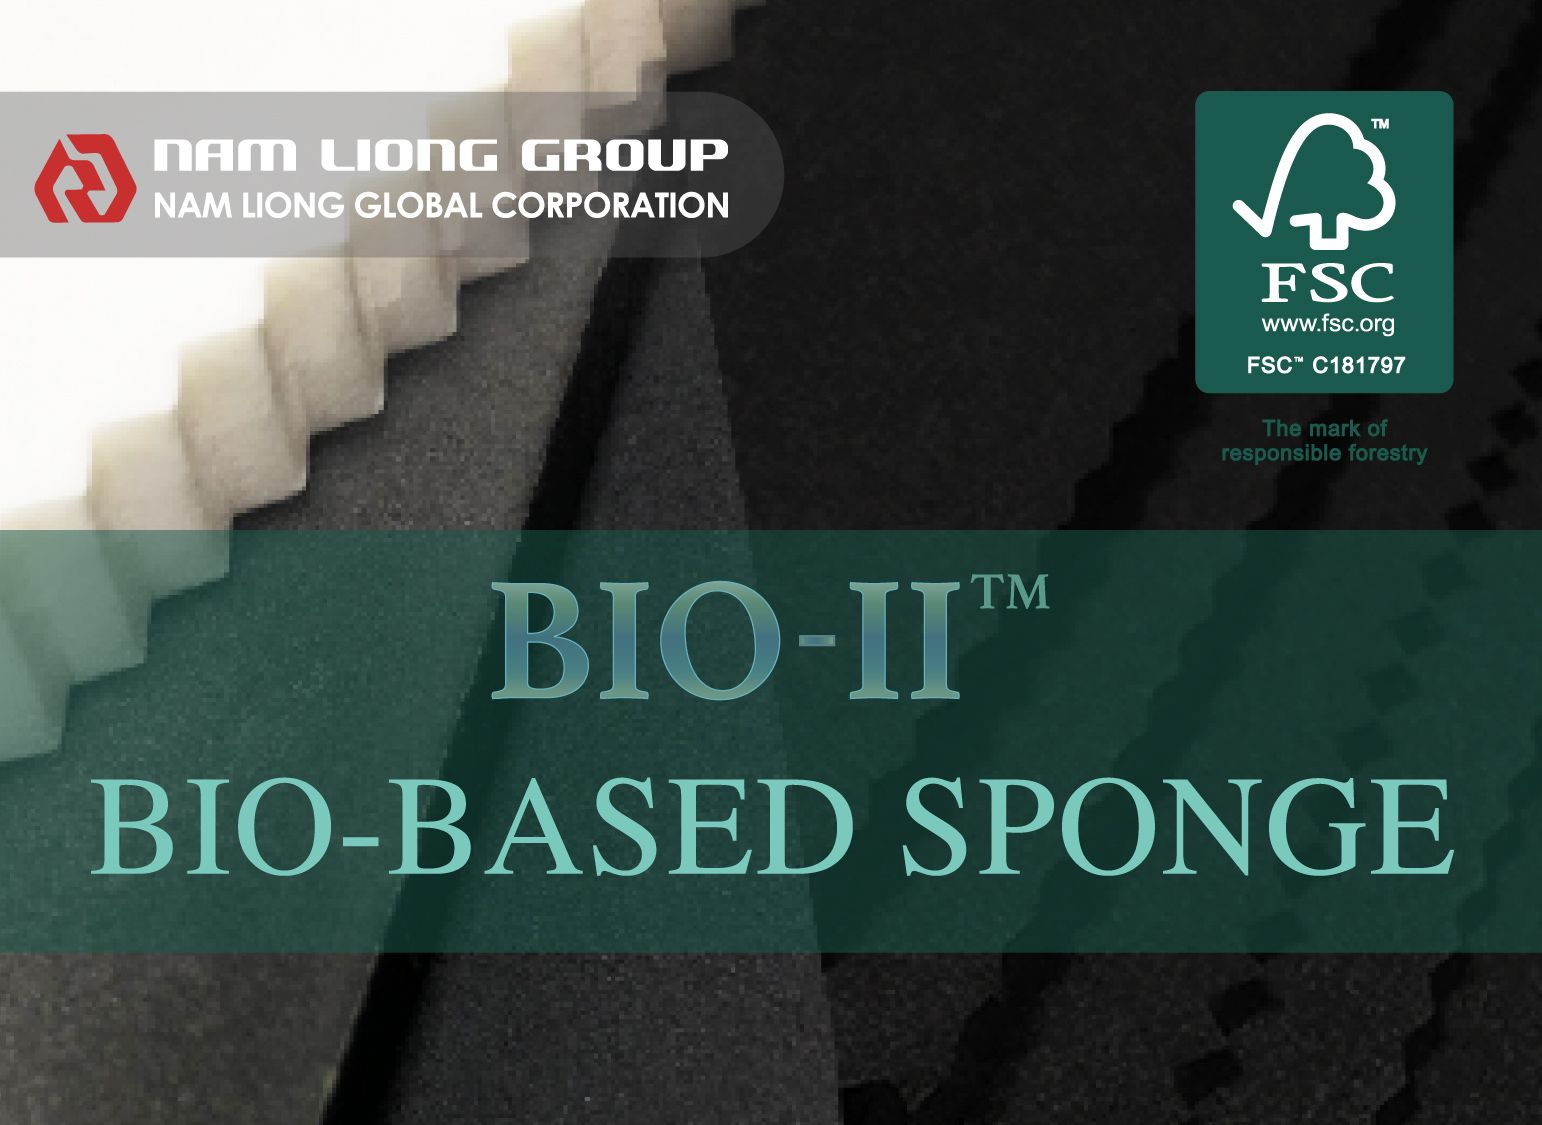 Nam Liong has the bio-based series for both rubber foam and thermoplastic foam.